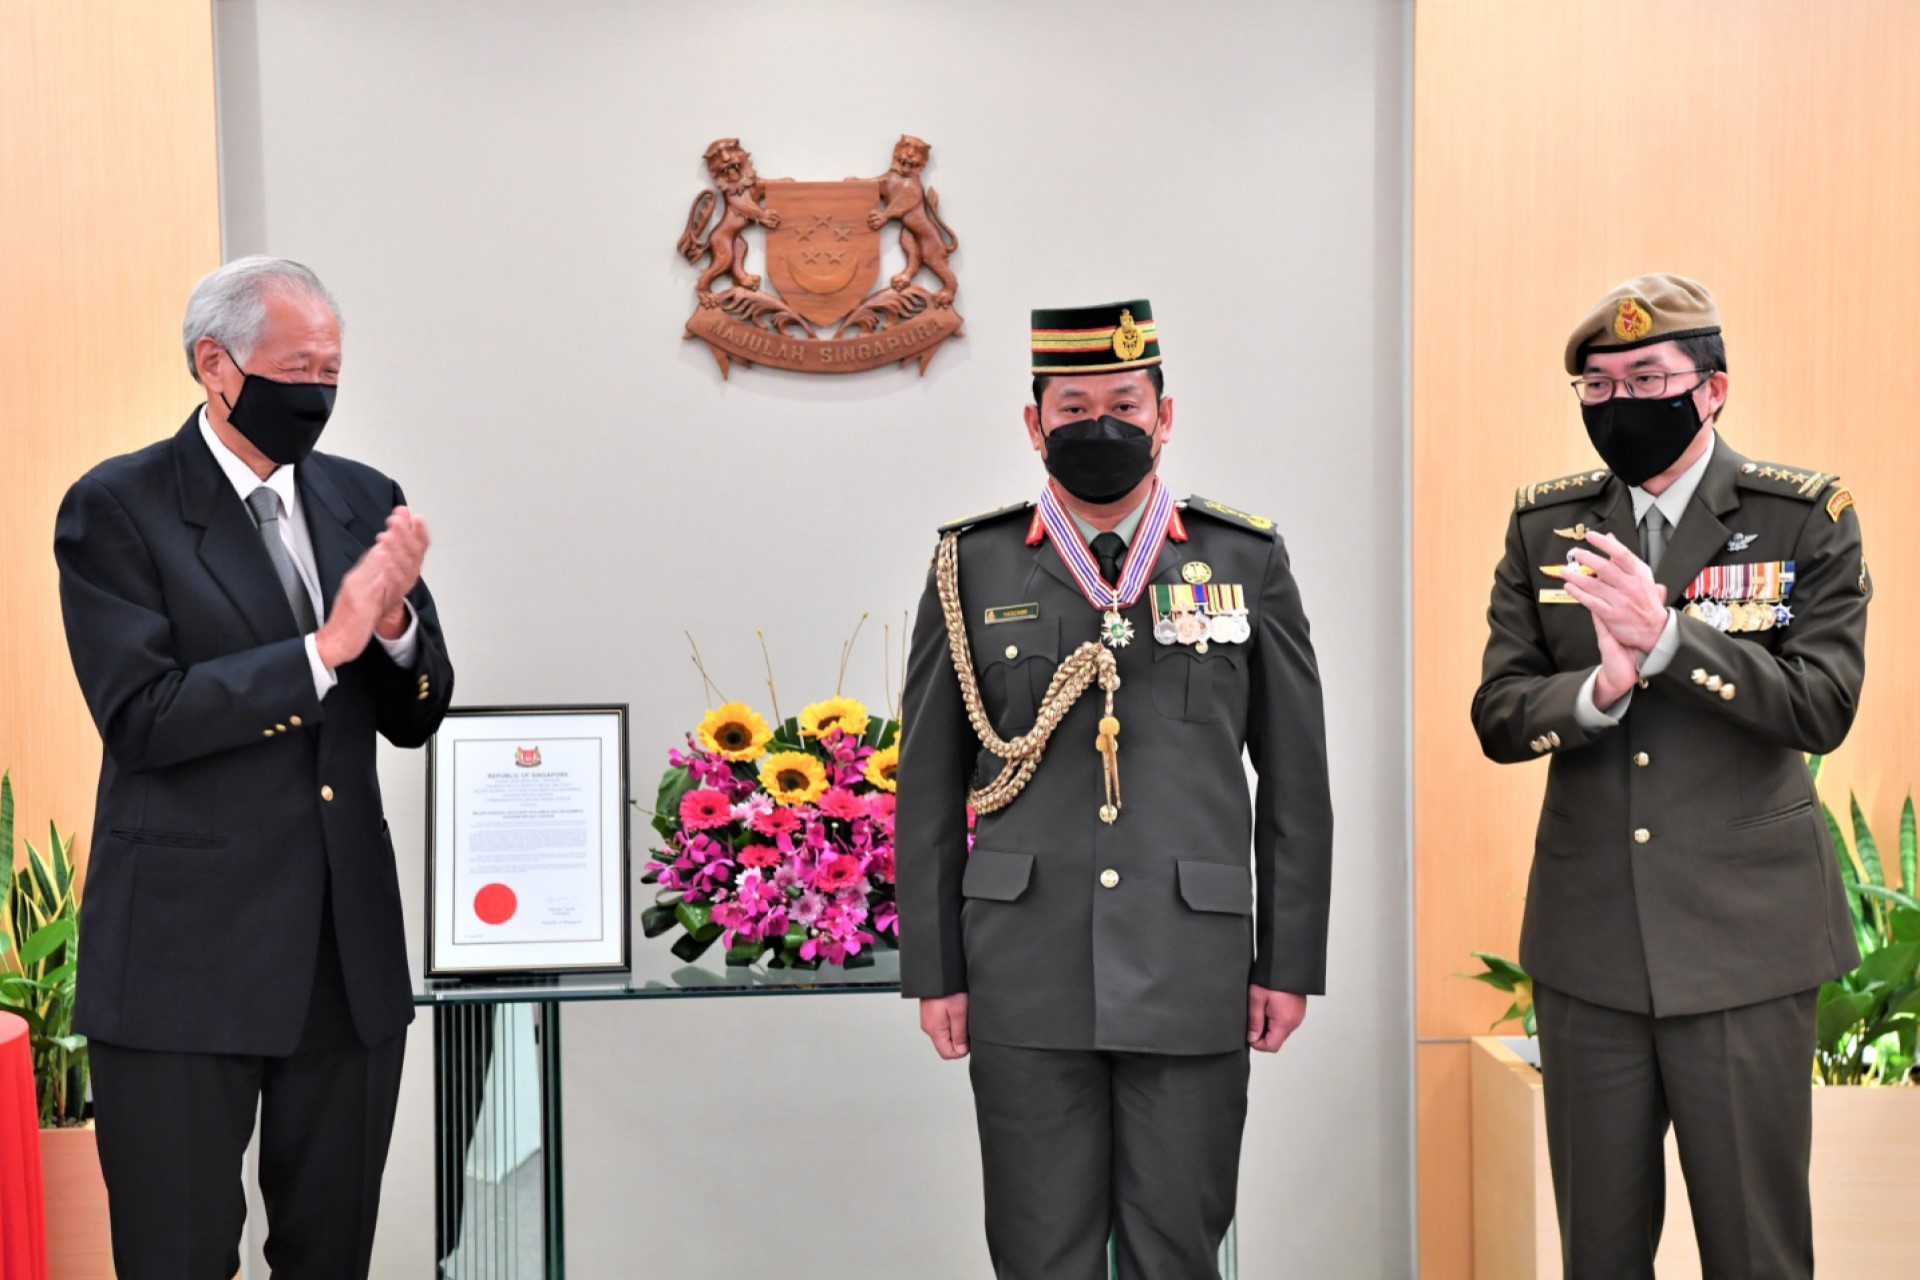 The Commander of the Royal Brunei Armed Forces Major General (MG) Dato Seri Pahlawan Haji Muhammad Haszaimi bin Bol Hassan was presented the Meritorious Service Medal (Military) by Minister for Defence Dr Ng Eng Hen at the Ministry of Defence (MINDEF).